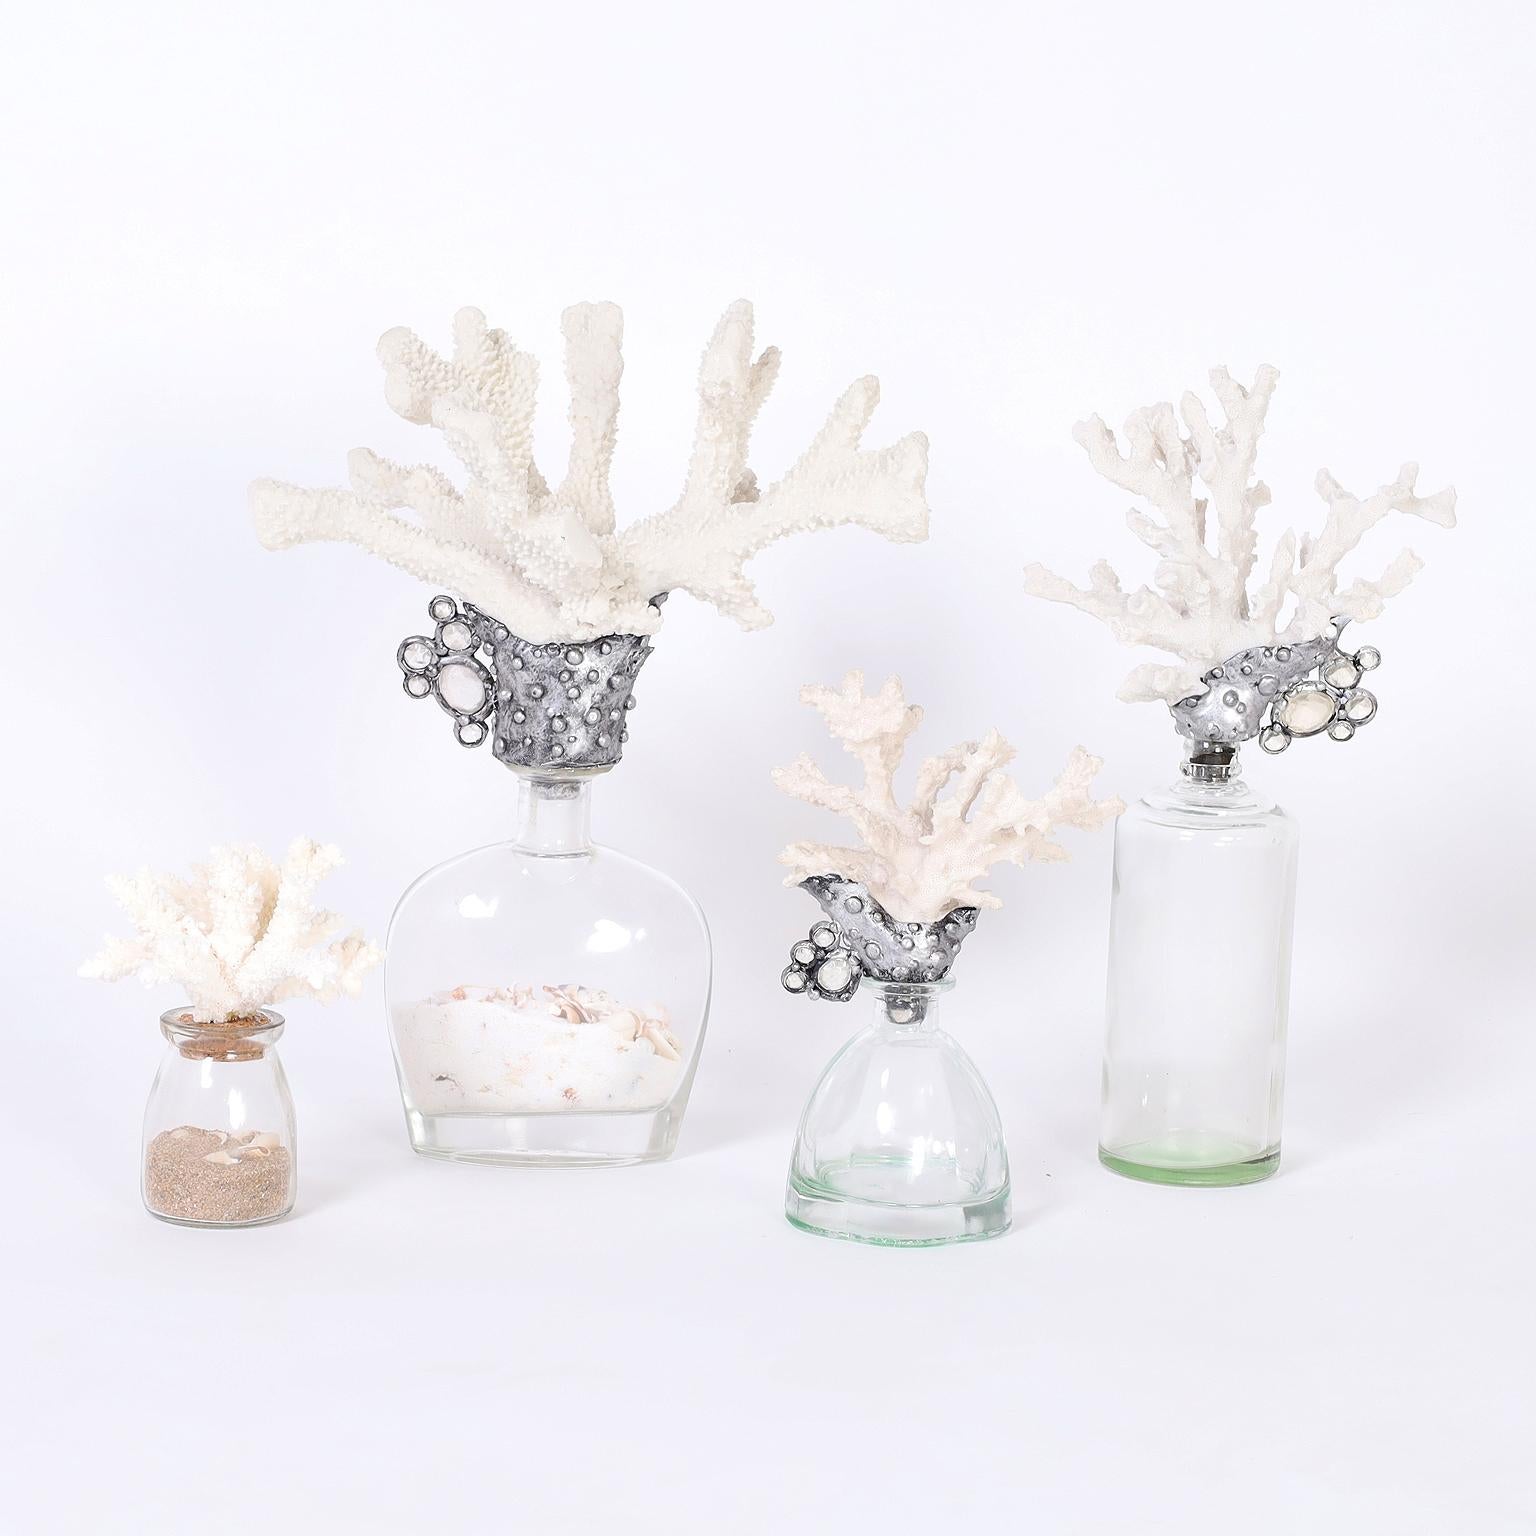 Collection of four objects of art each with its own ocean inspired composition in faux coral, metal, and glass. Priced individually. 

From left to right.

5783A: H: 6.5 W: 5 D: 4 $570

5783B: H: 15 W: 12 D: 8.5 $1250.00

5783C: H: 9.5 W: 6